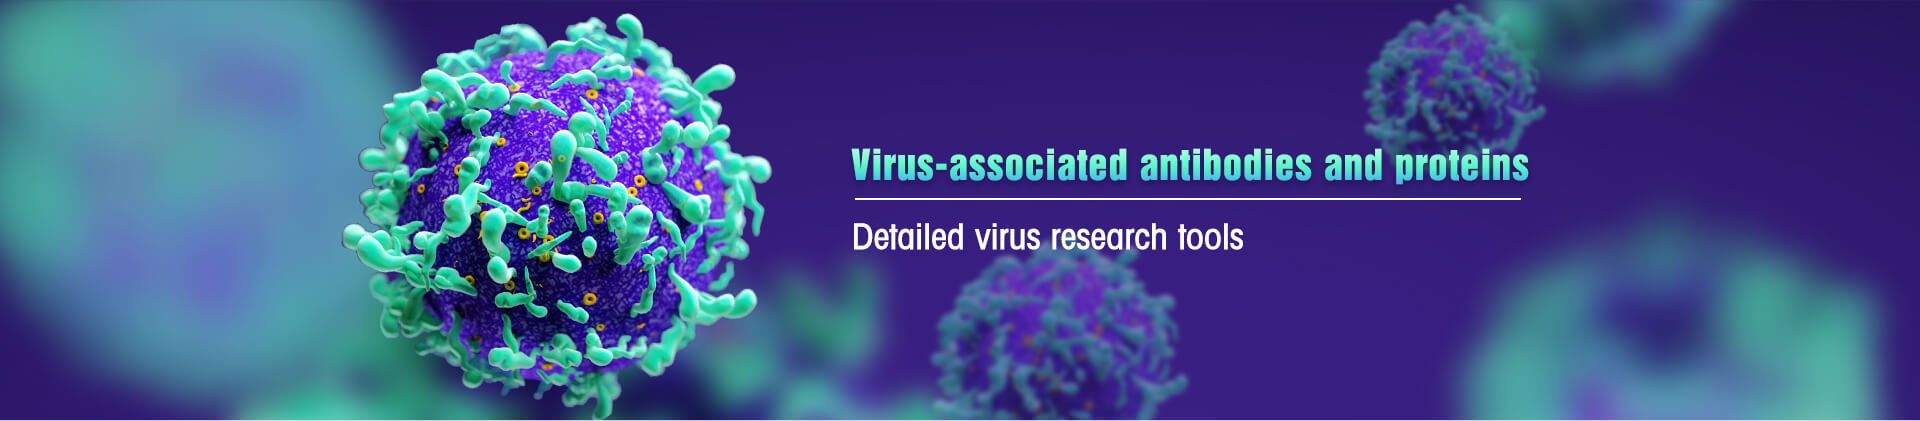 Antibodies and Proteins in Virus Research